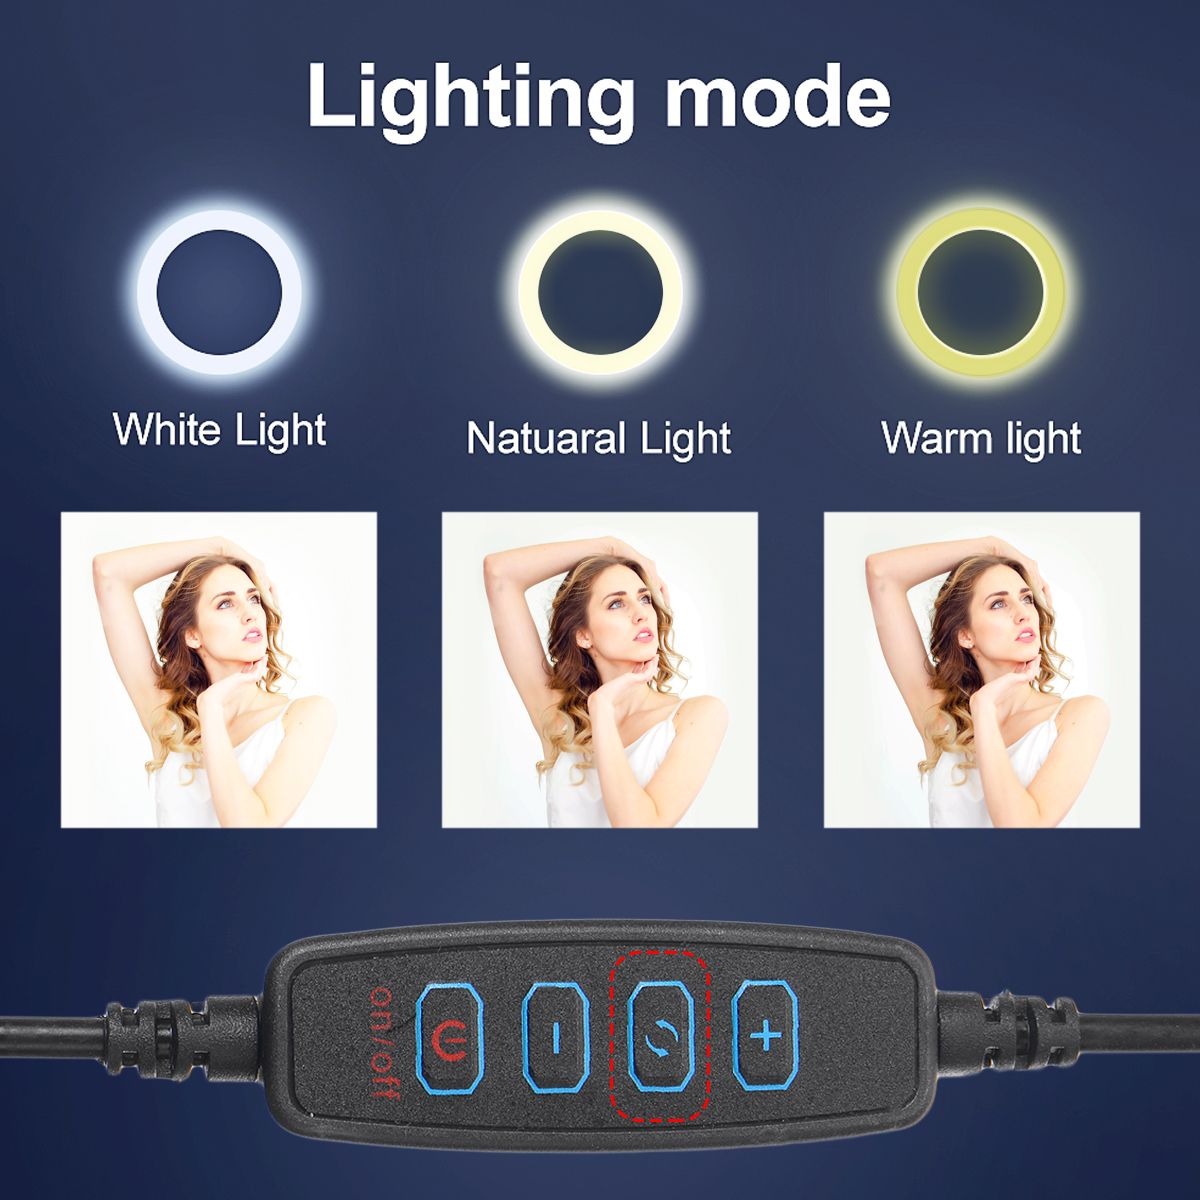 16cm-3200K-5500K-Dimmable-LED-Fill-Light-Photography-Ring-Light-for-Video-Live-Blogger-Photography-T-1649989